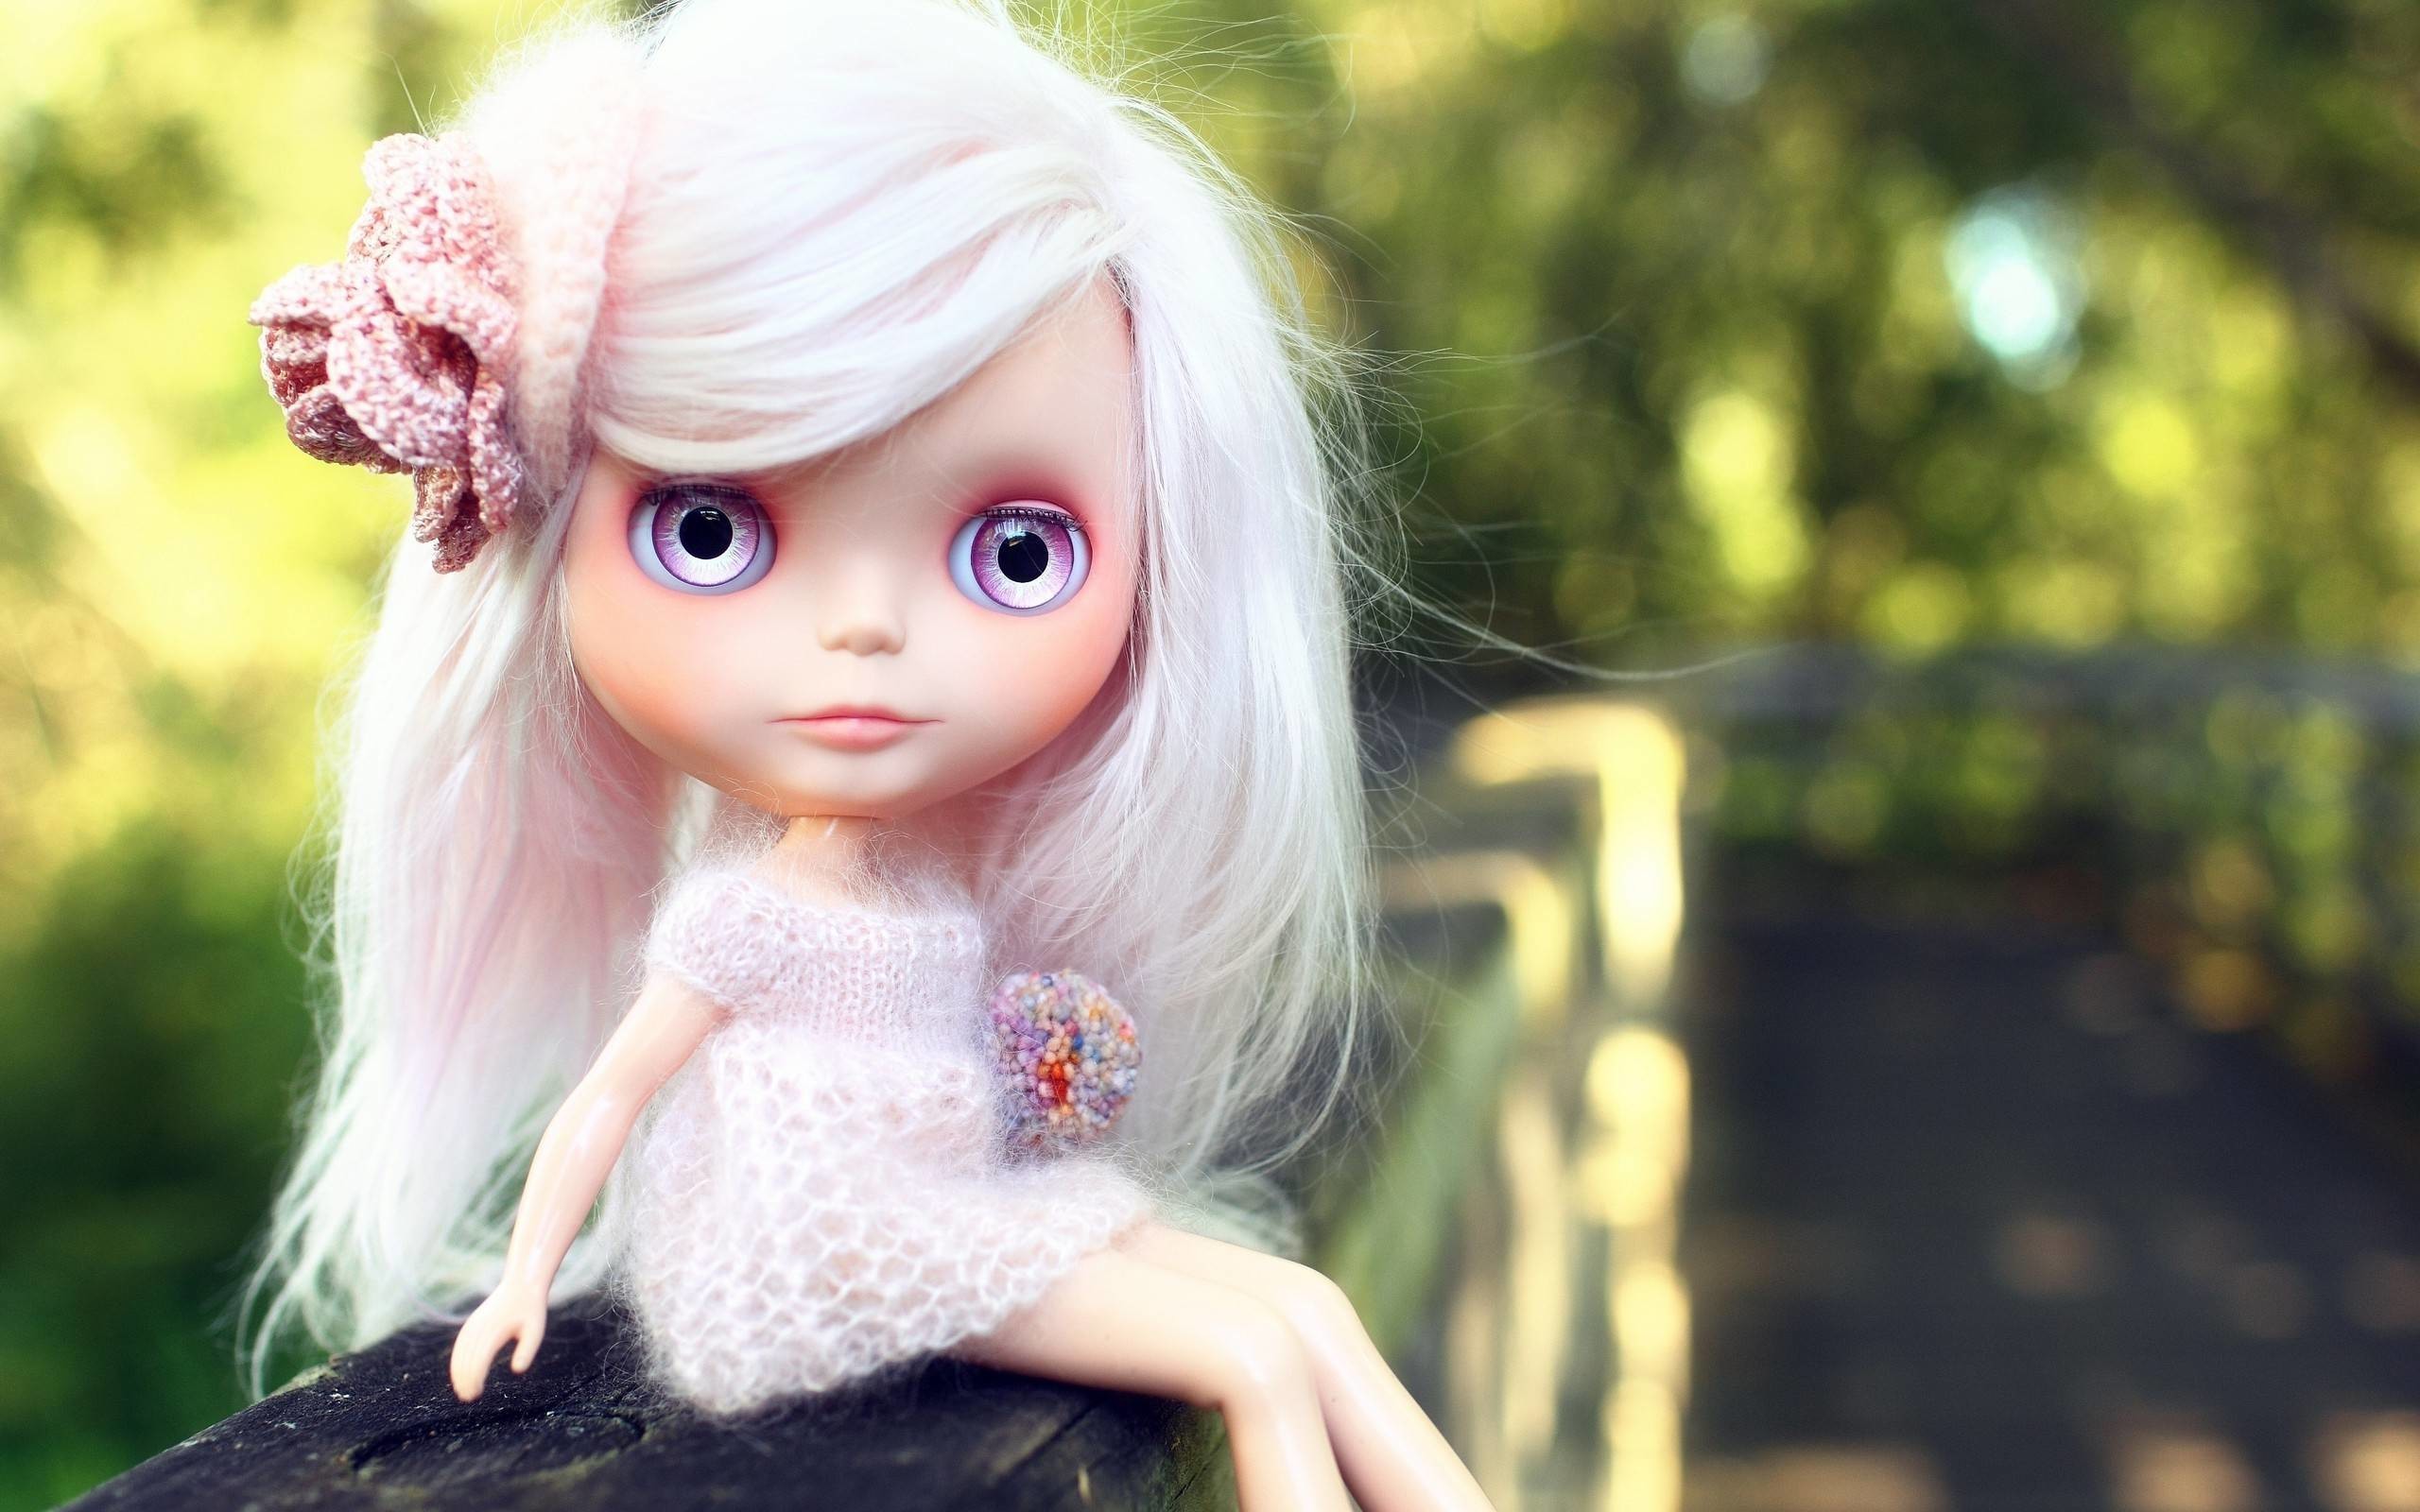 2560x1600 Find out: Cute Doll wallpaper on http://hdpicorner.com/cute